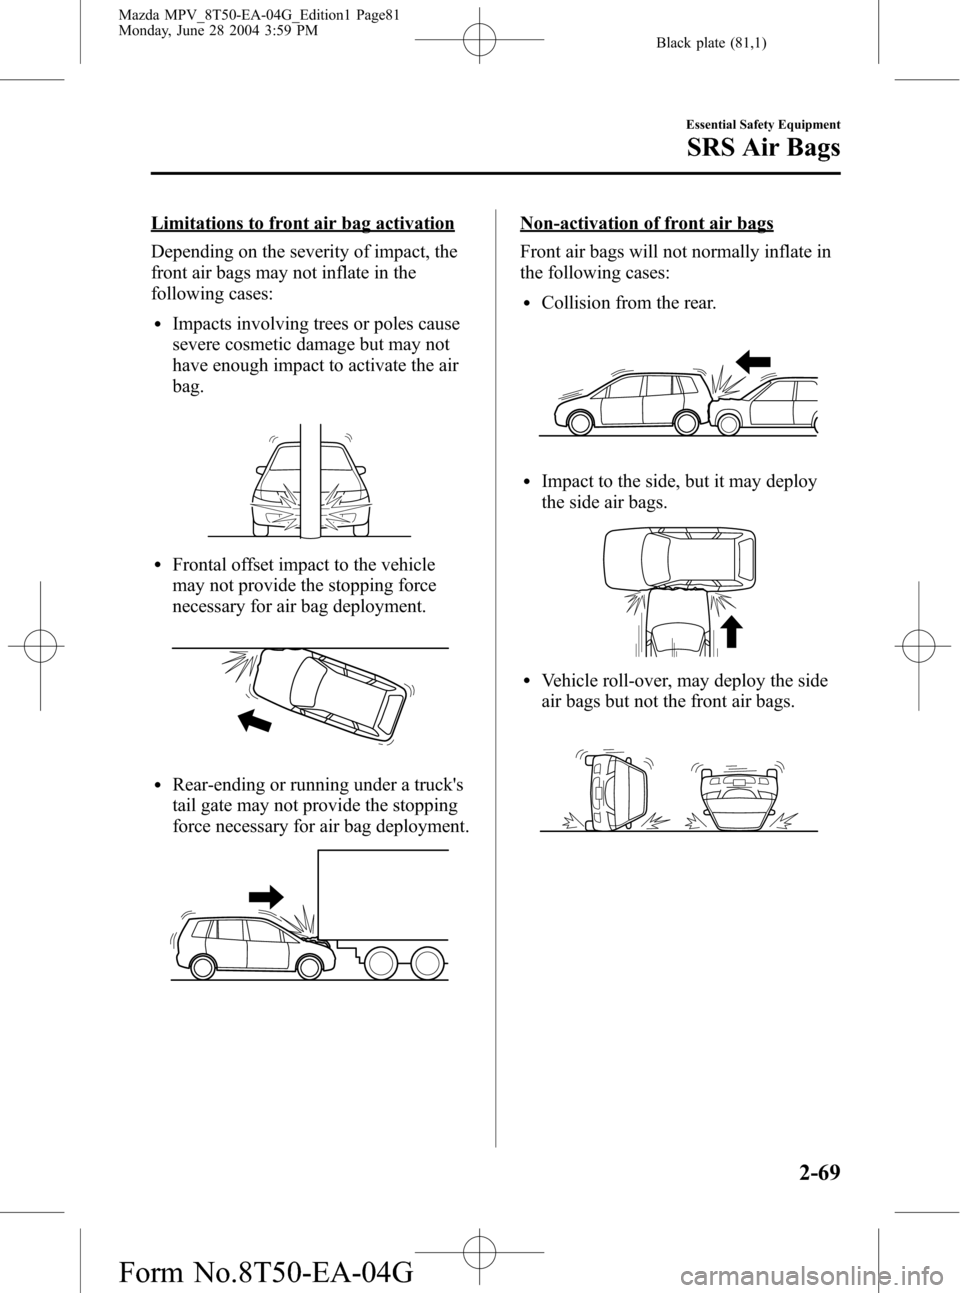 MAZDA MODEL MPV 2005  Owners Manual (in English) Black plate (81,1)
Limitations to front air bag activation
Depending on the severity of impact, the
front air bags may not inflate in the
following cases:
lImpacts involving trees or poles cause
sever